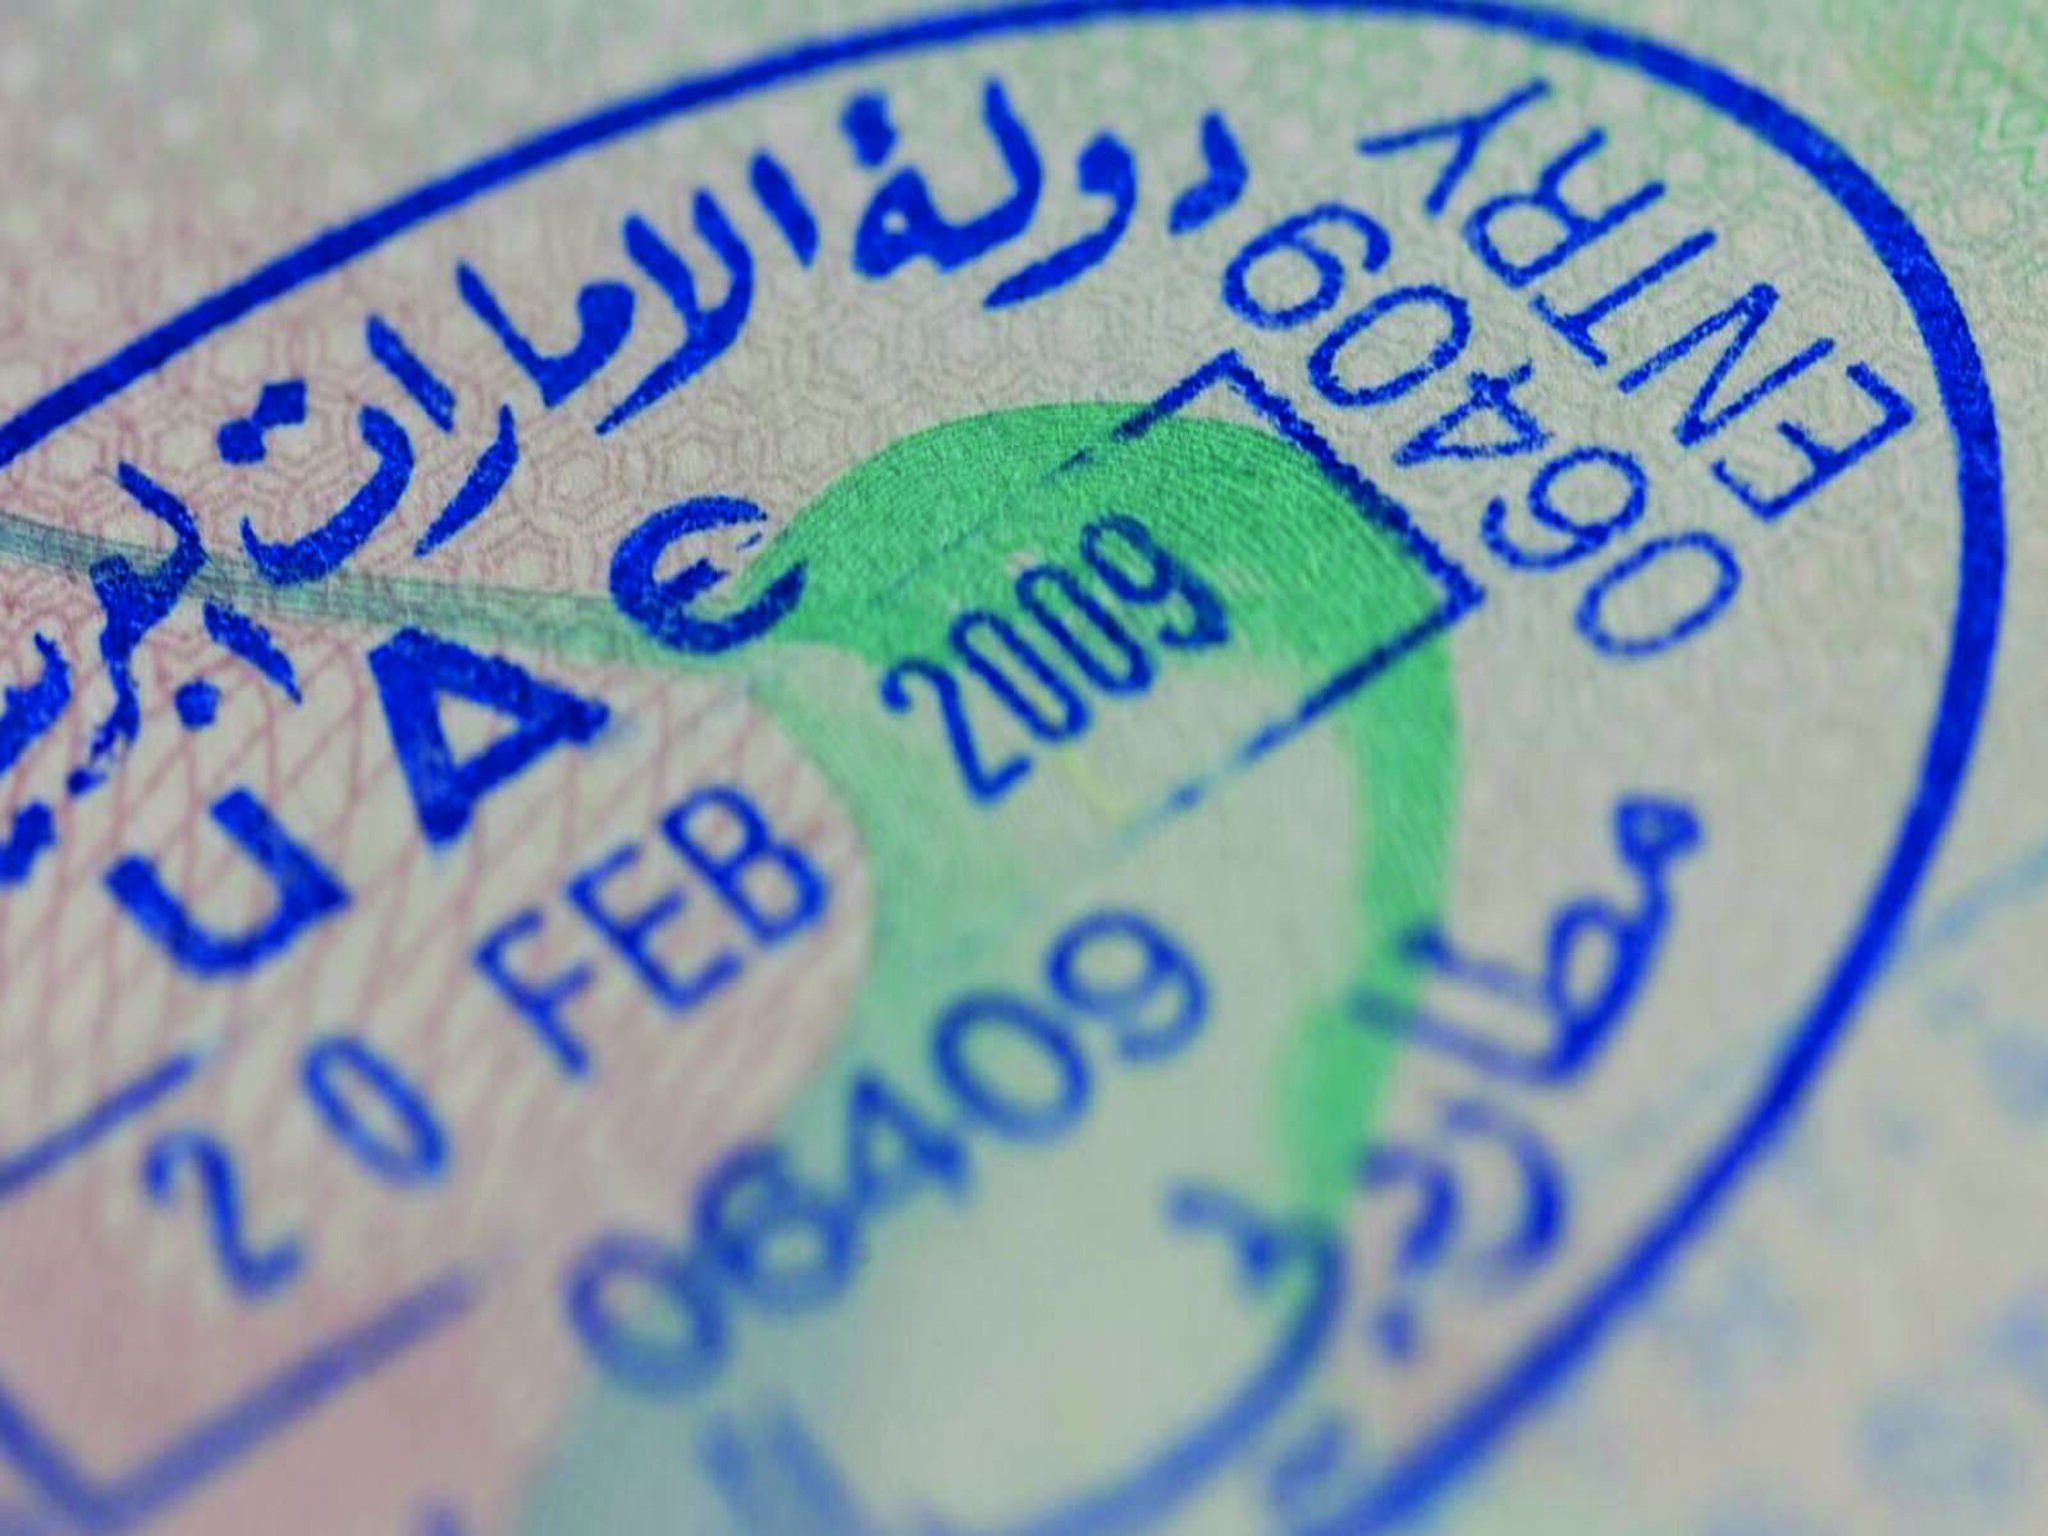 UAE provides 7 types of visas available to residents for work and residence